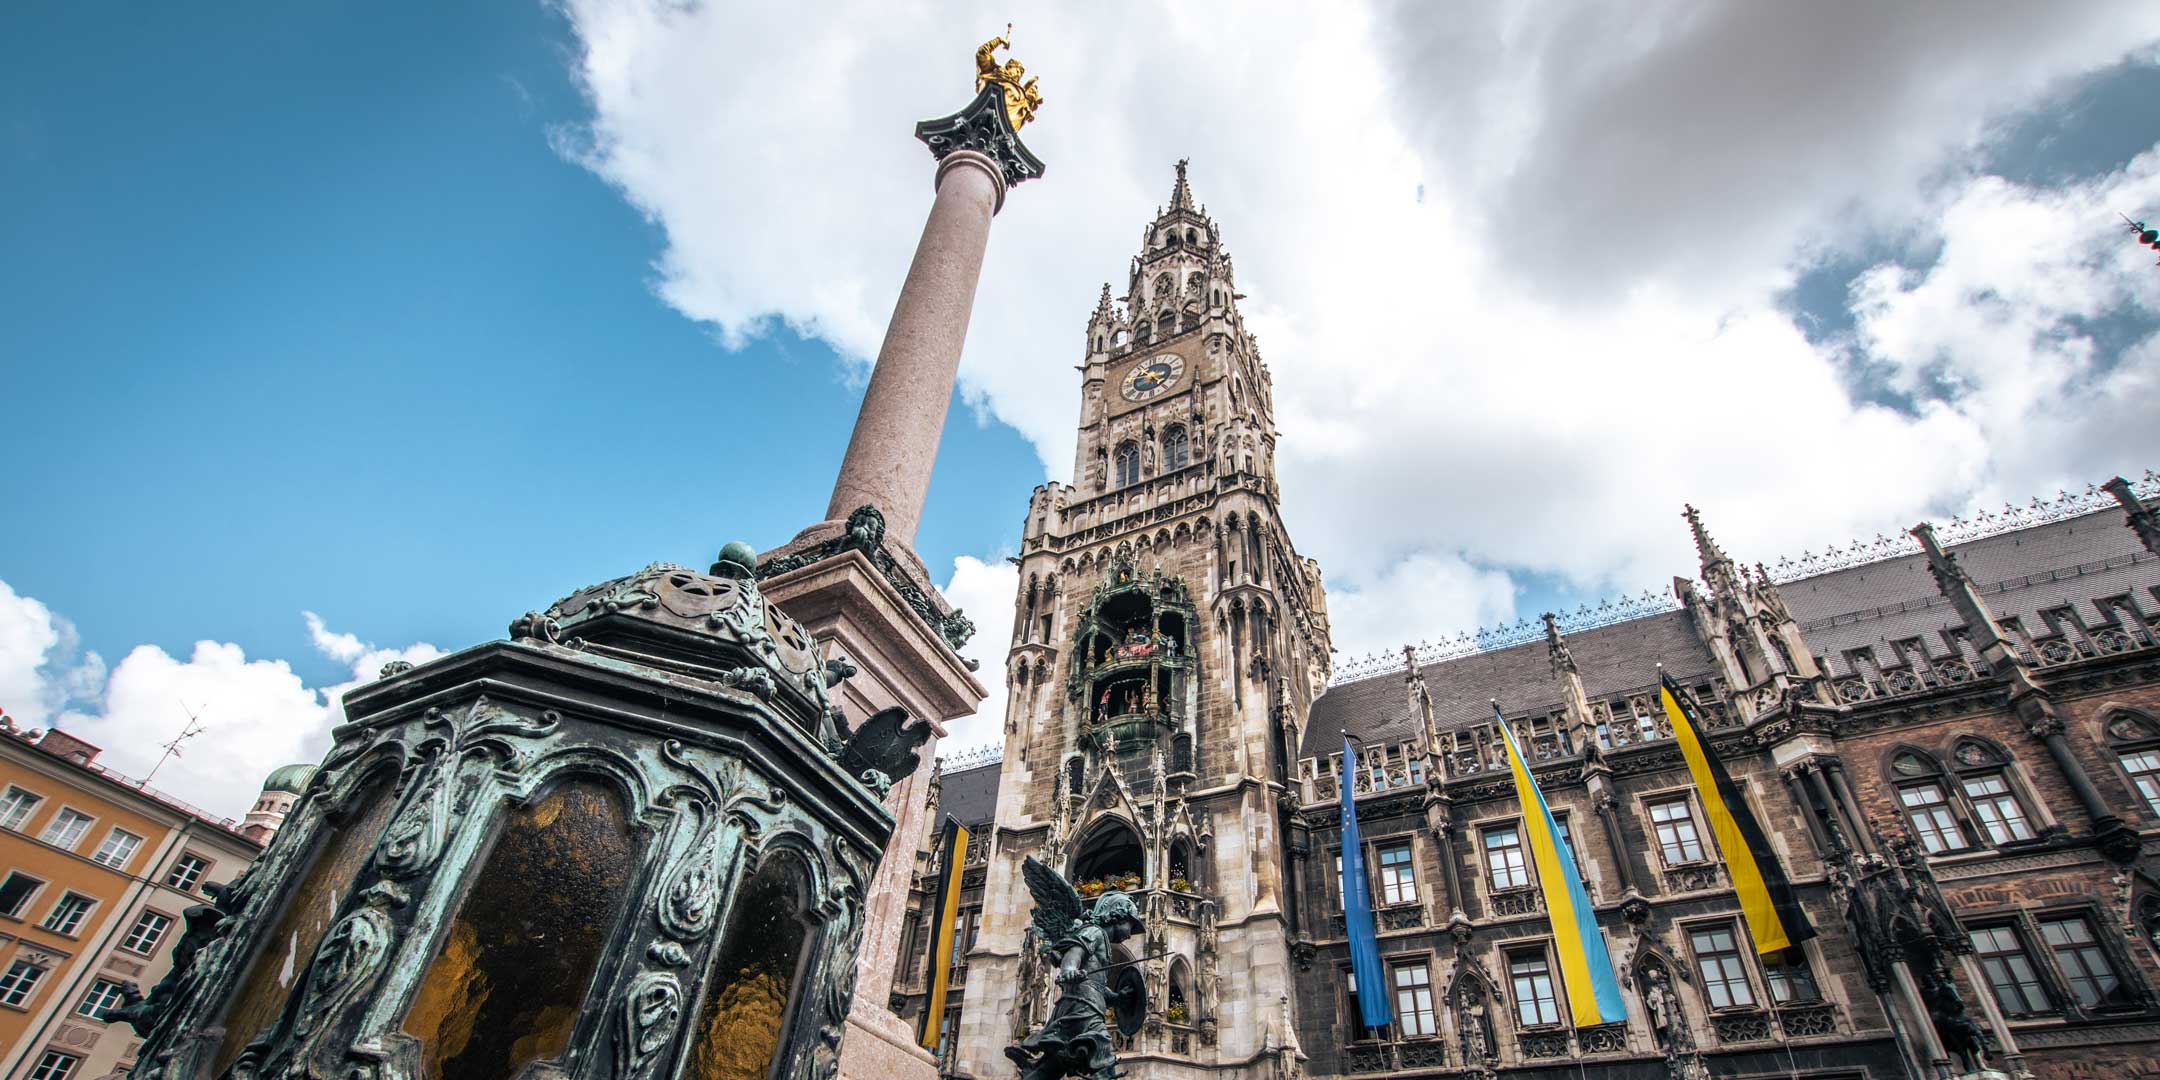 How to Spend 2 Days in Munich – The Best Travel Itinerary